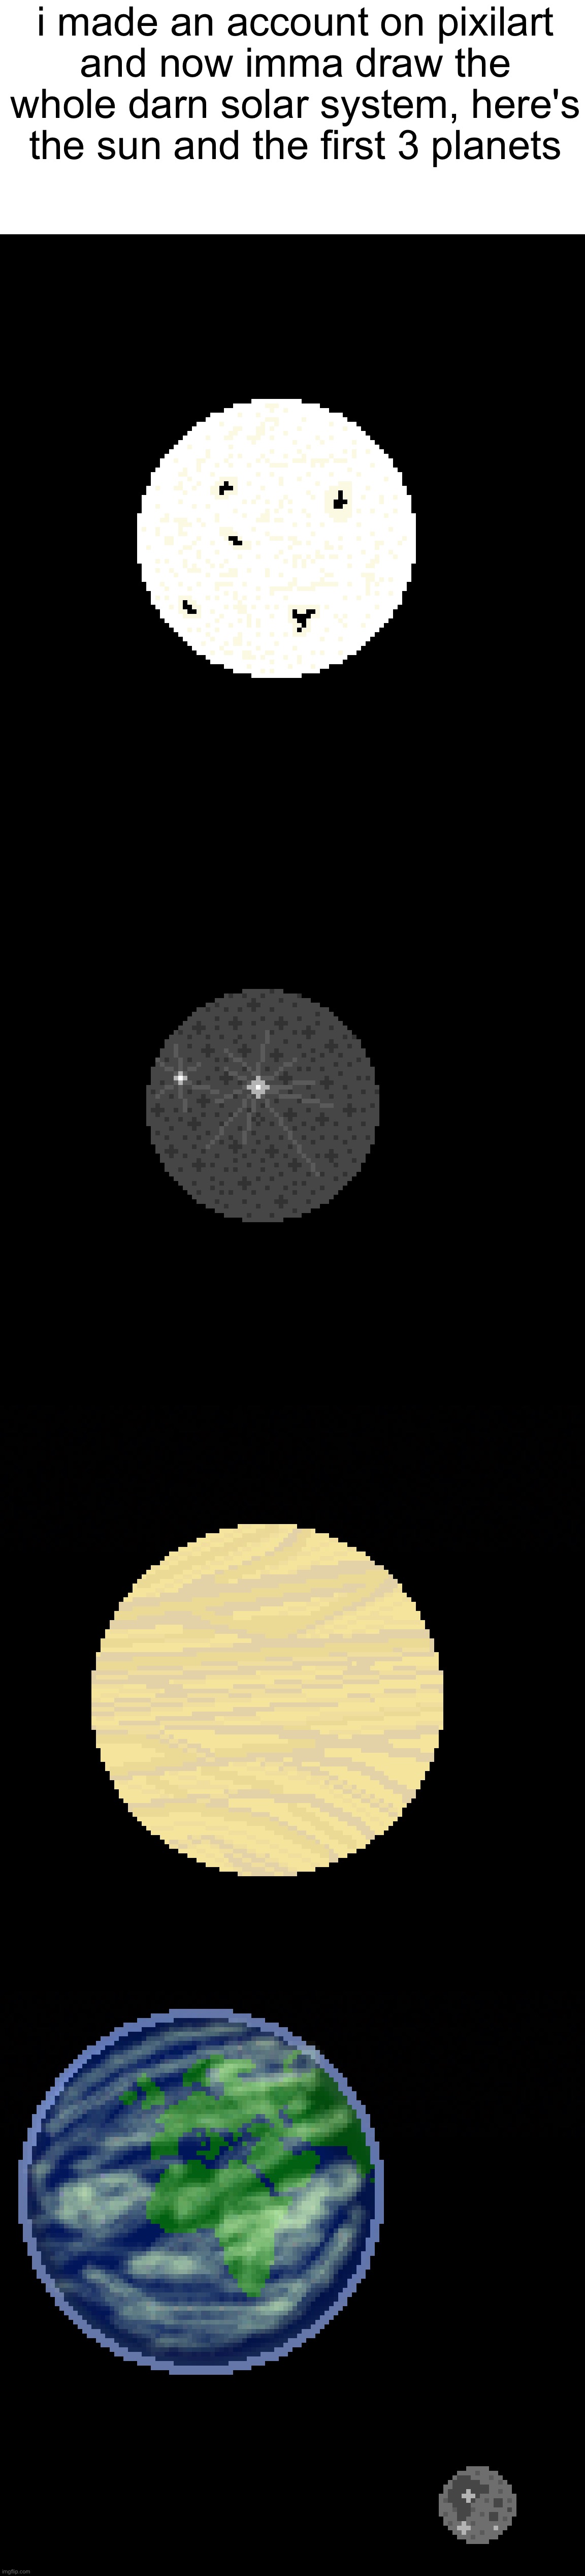 yeahhh this is gonna take a while | i made an account on pixilart
and now imma draw the whole darn solar system, here's the sun and the first 3 planets | image tagged in drawings,pixel art,solar system | made w/ Imgflip meme maker